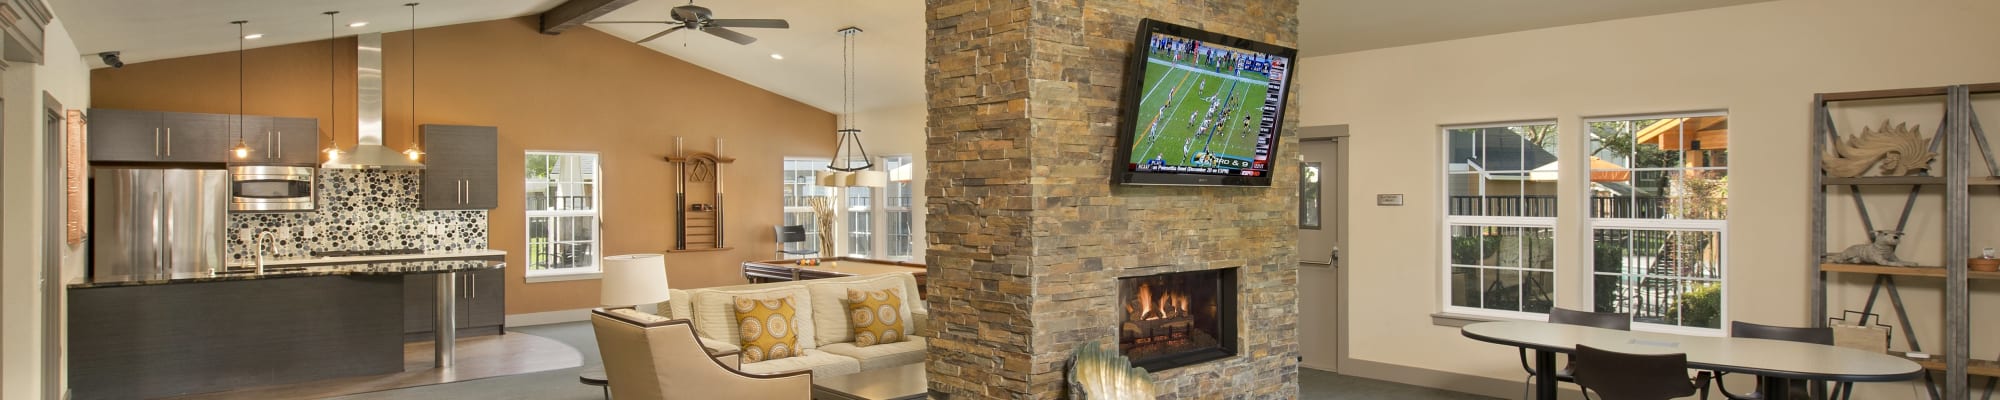 Amenities at Slate Ridge at Fisher's Landing Apartment Homes in Vancouver, Washington